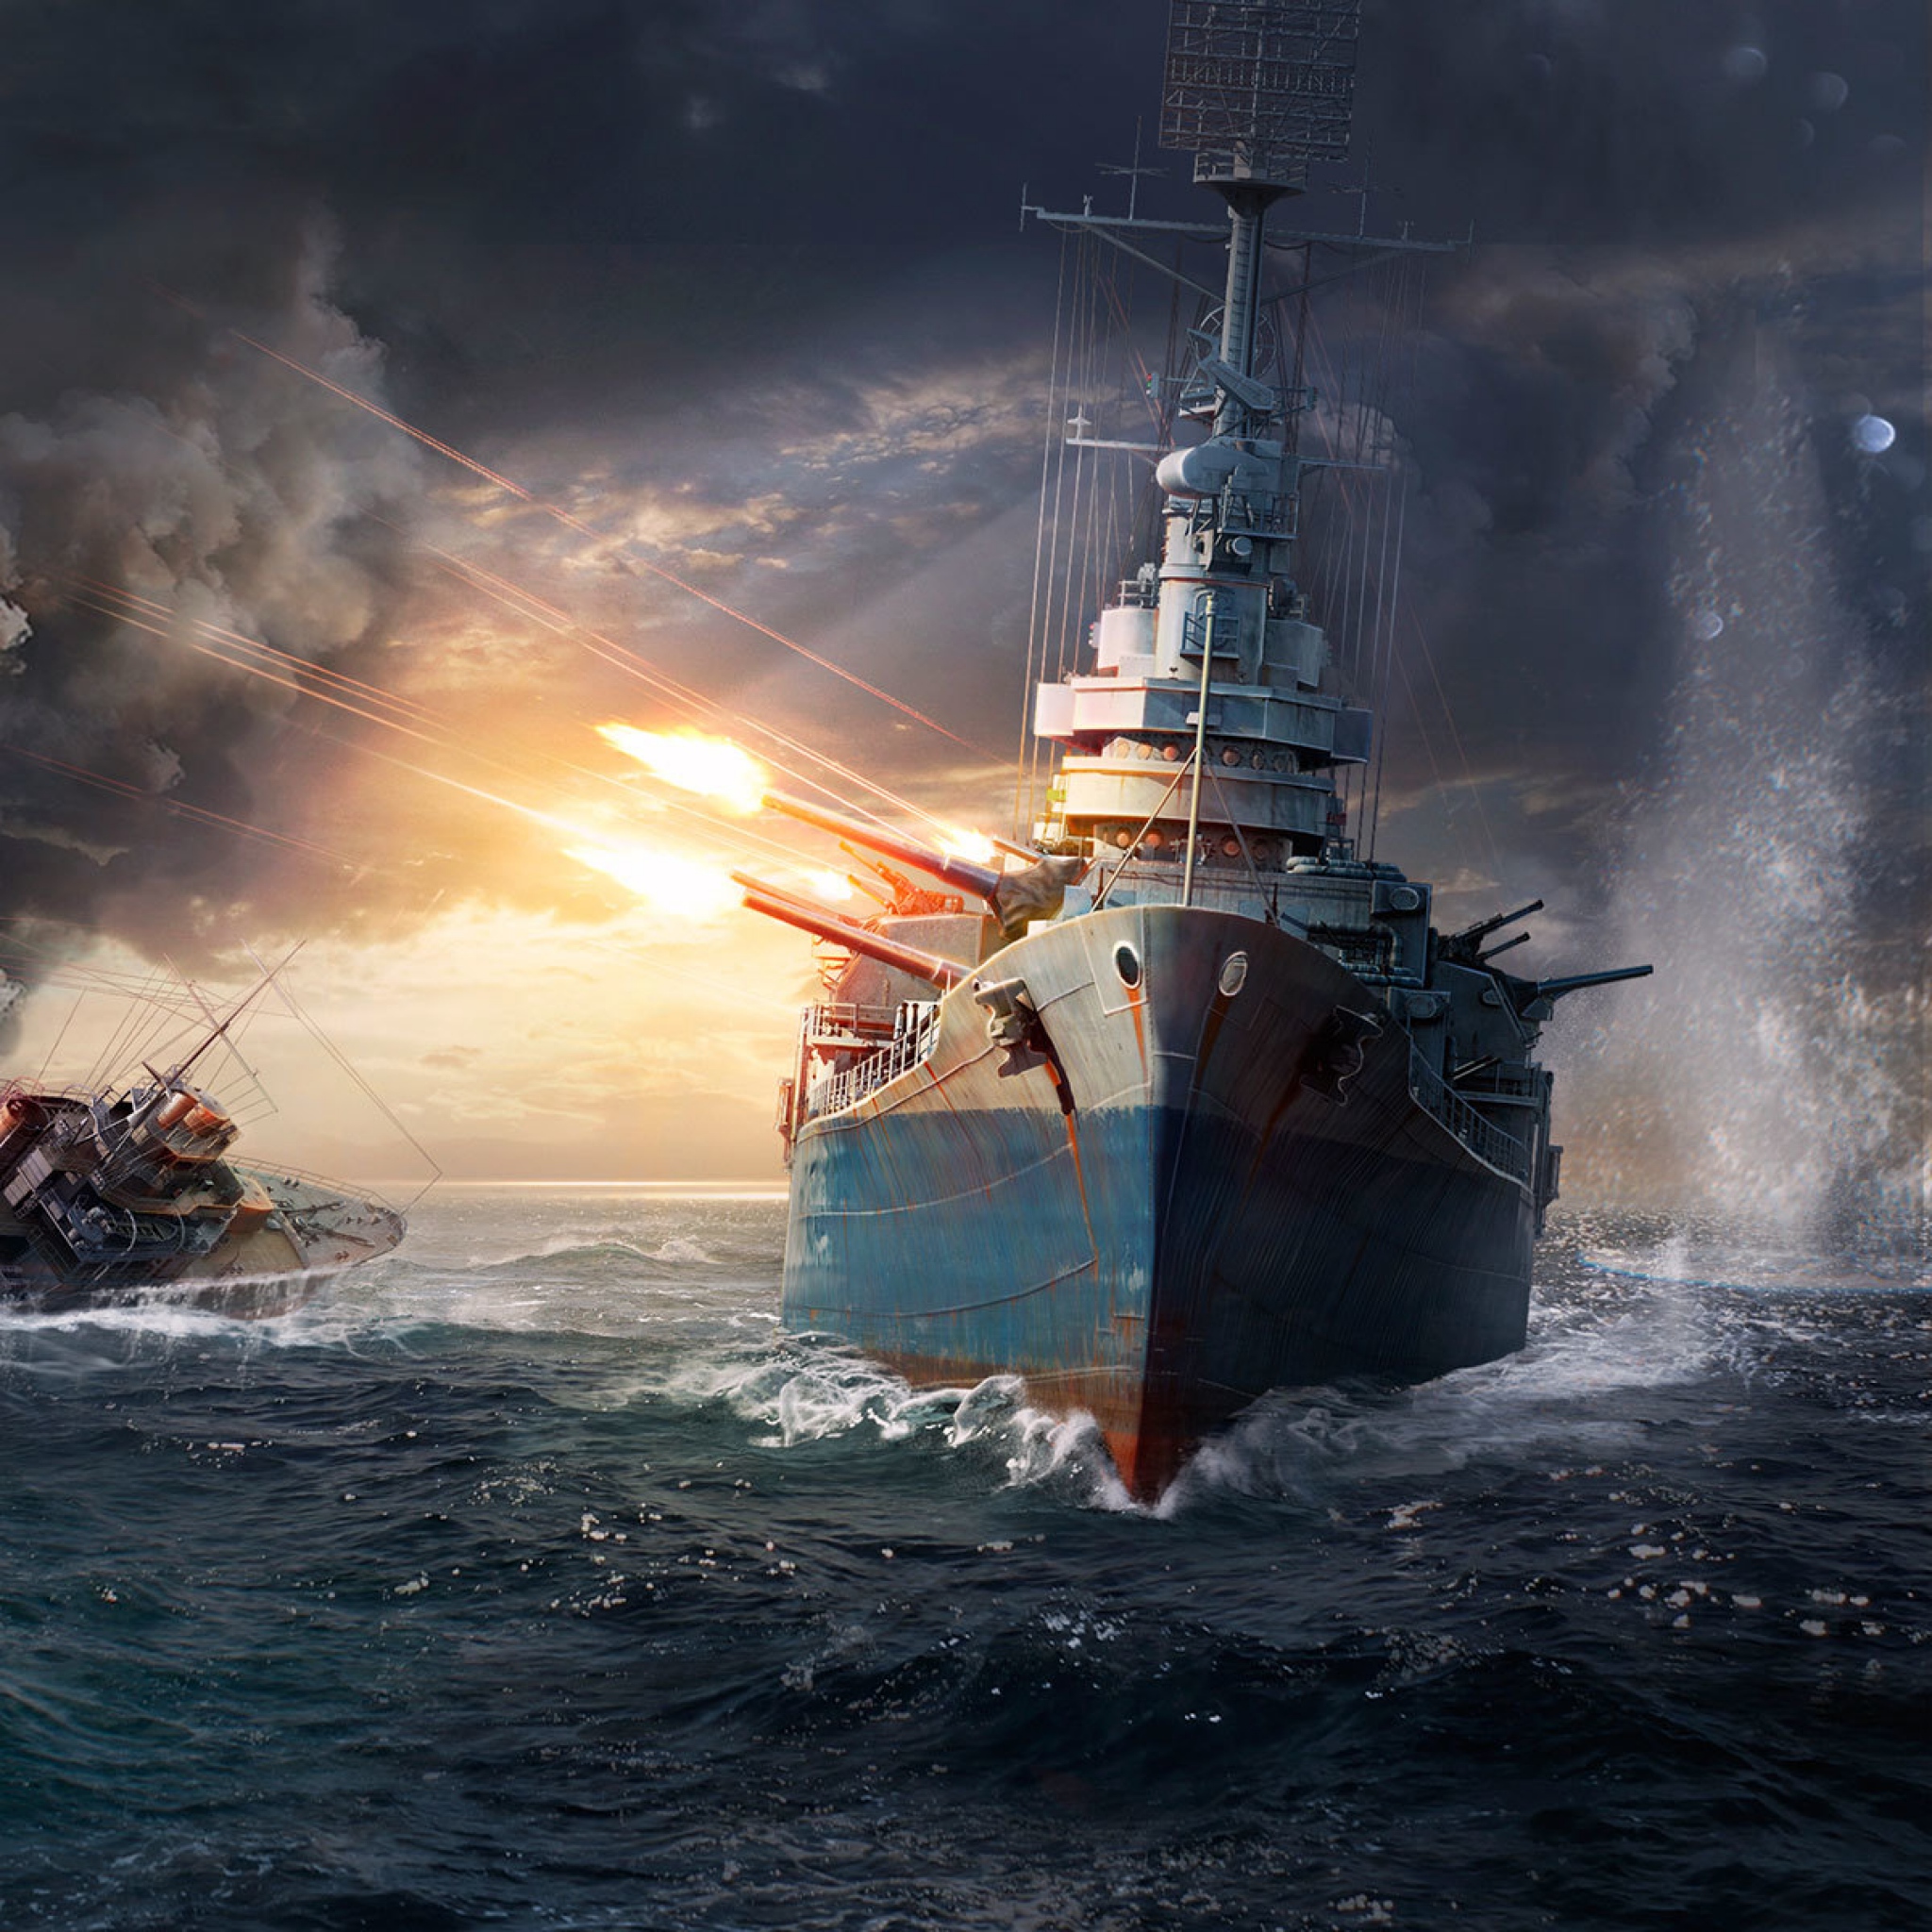 Pacific Warships free downloads